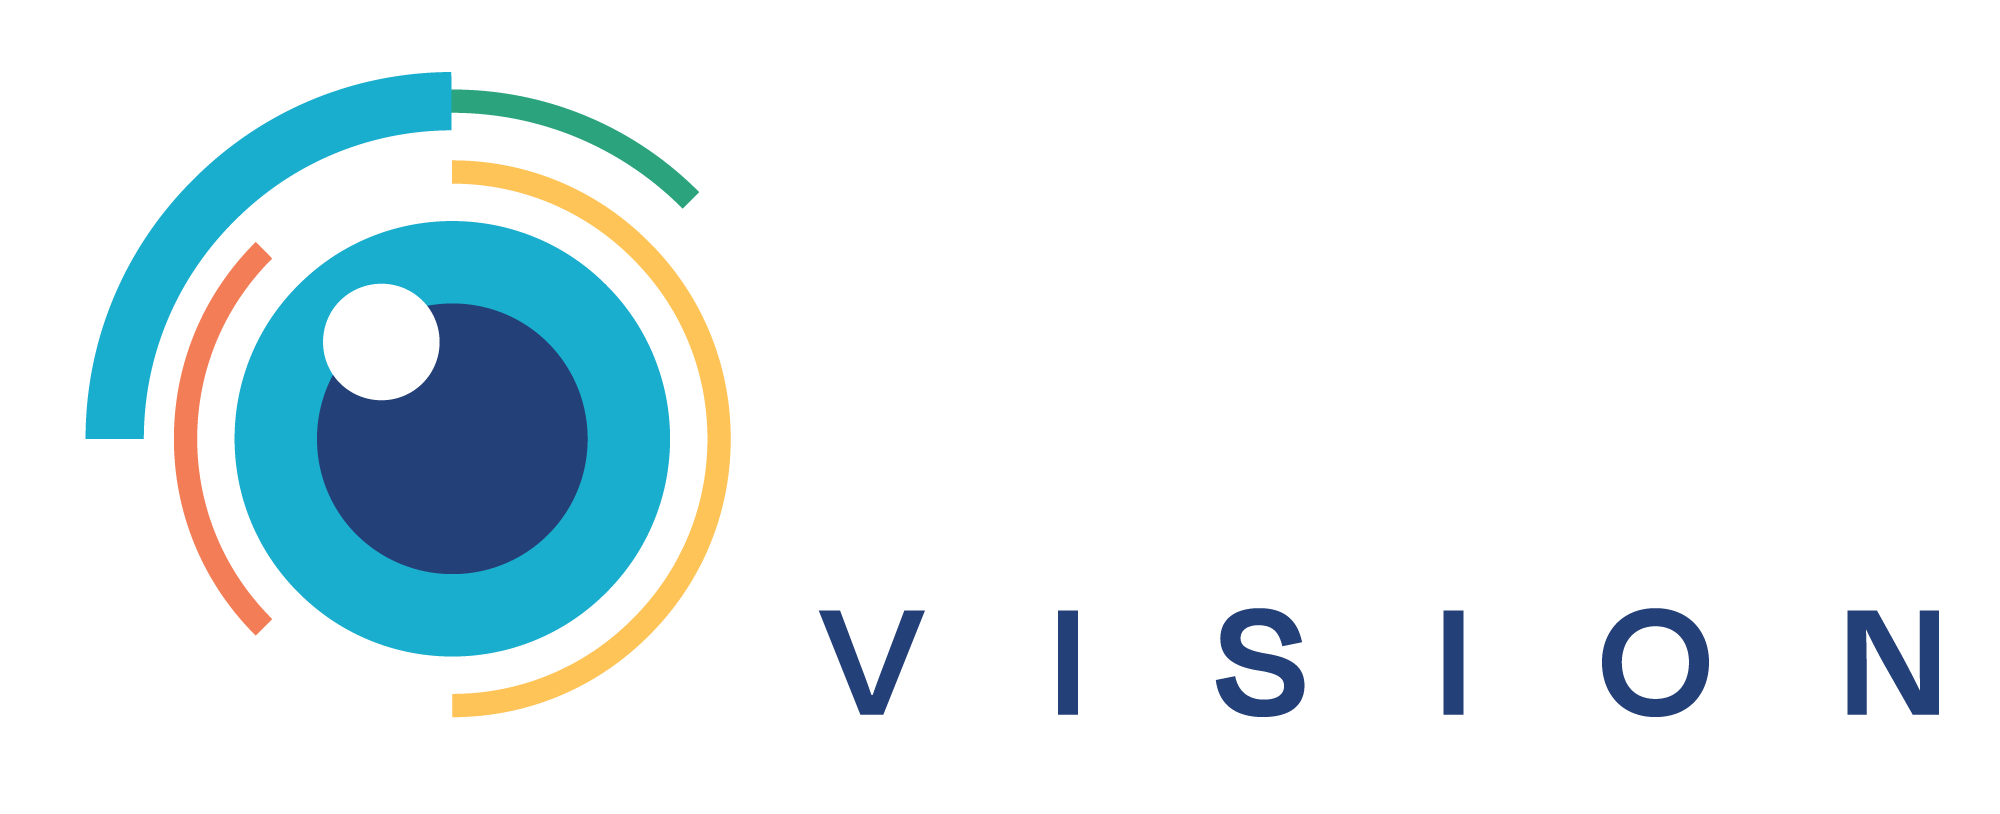 Home - iScreen Vision